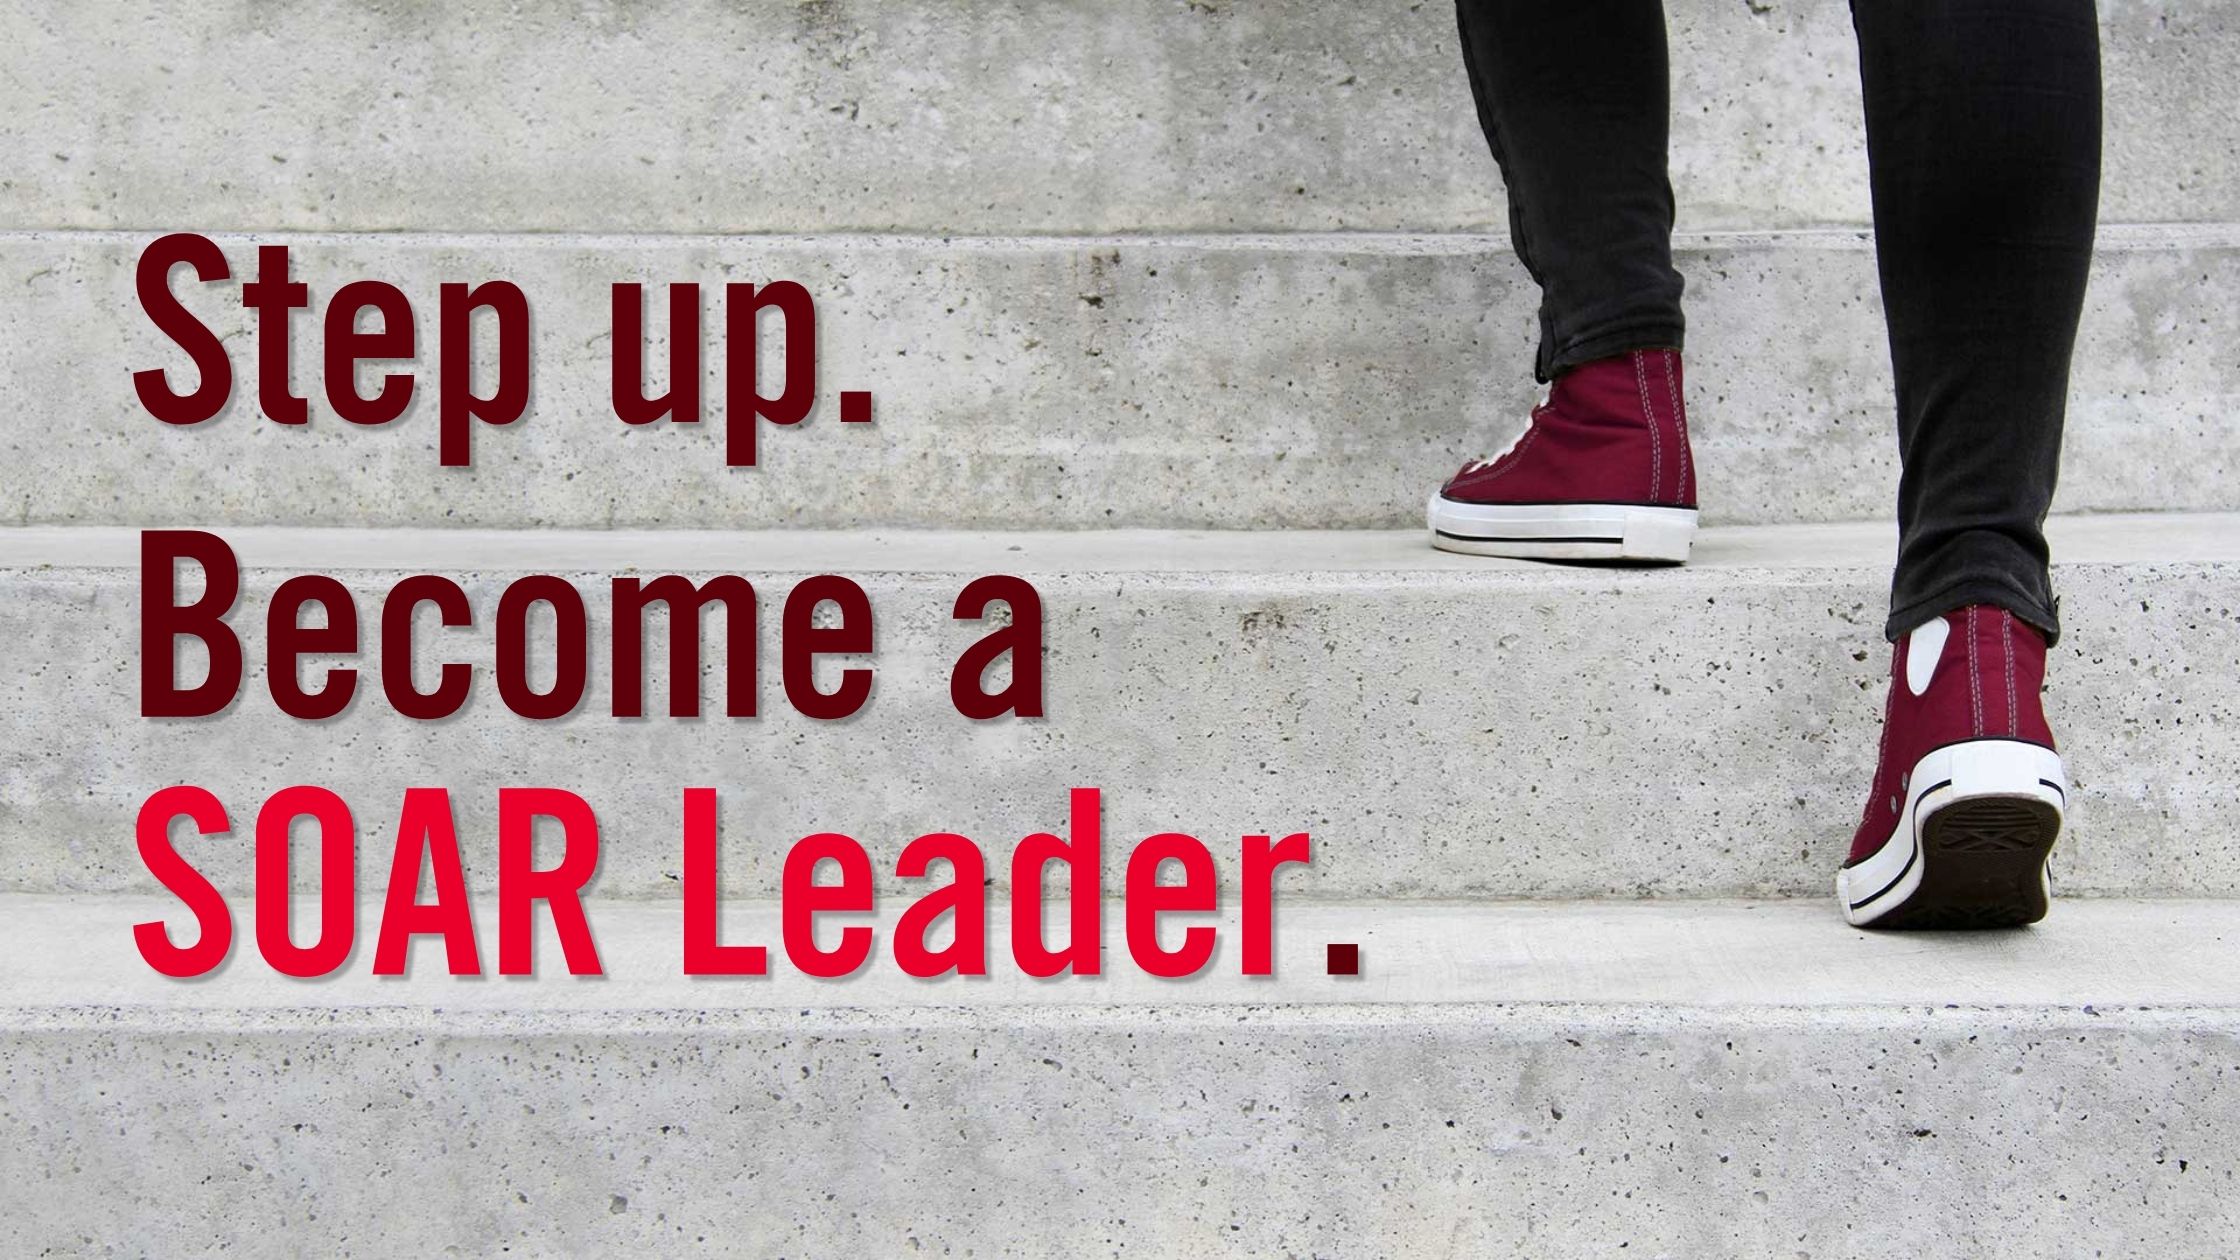 Image of feet walking up stairs with the text, "Step up. Become a SOAR leader."